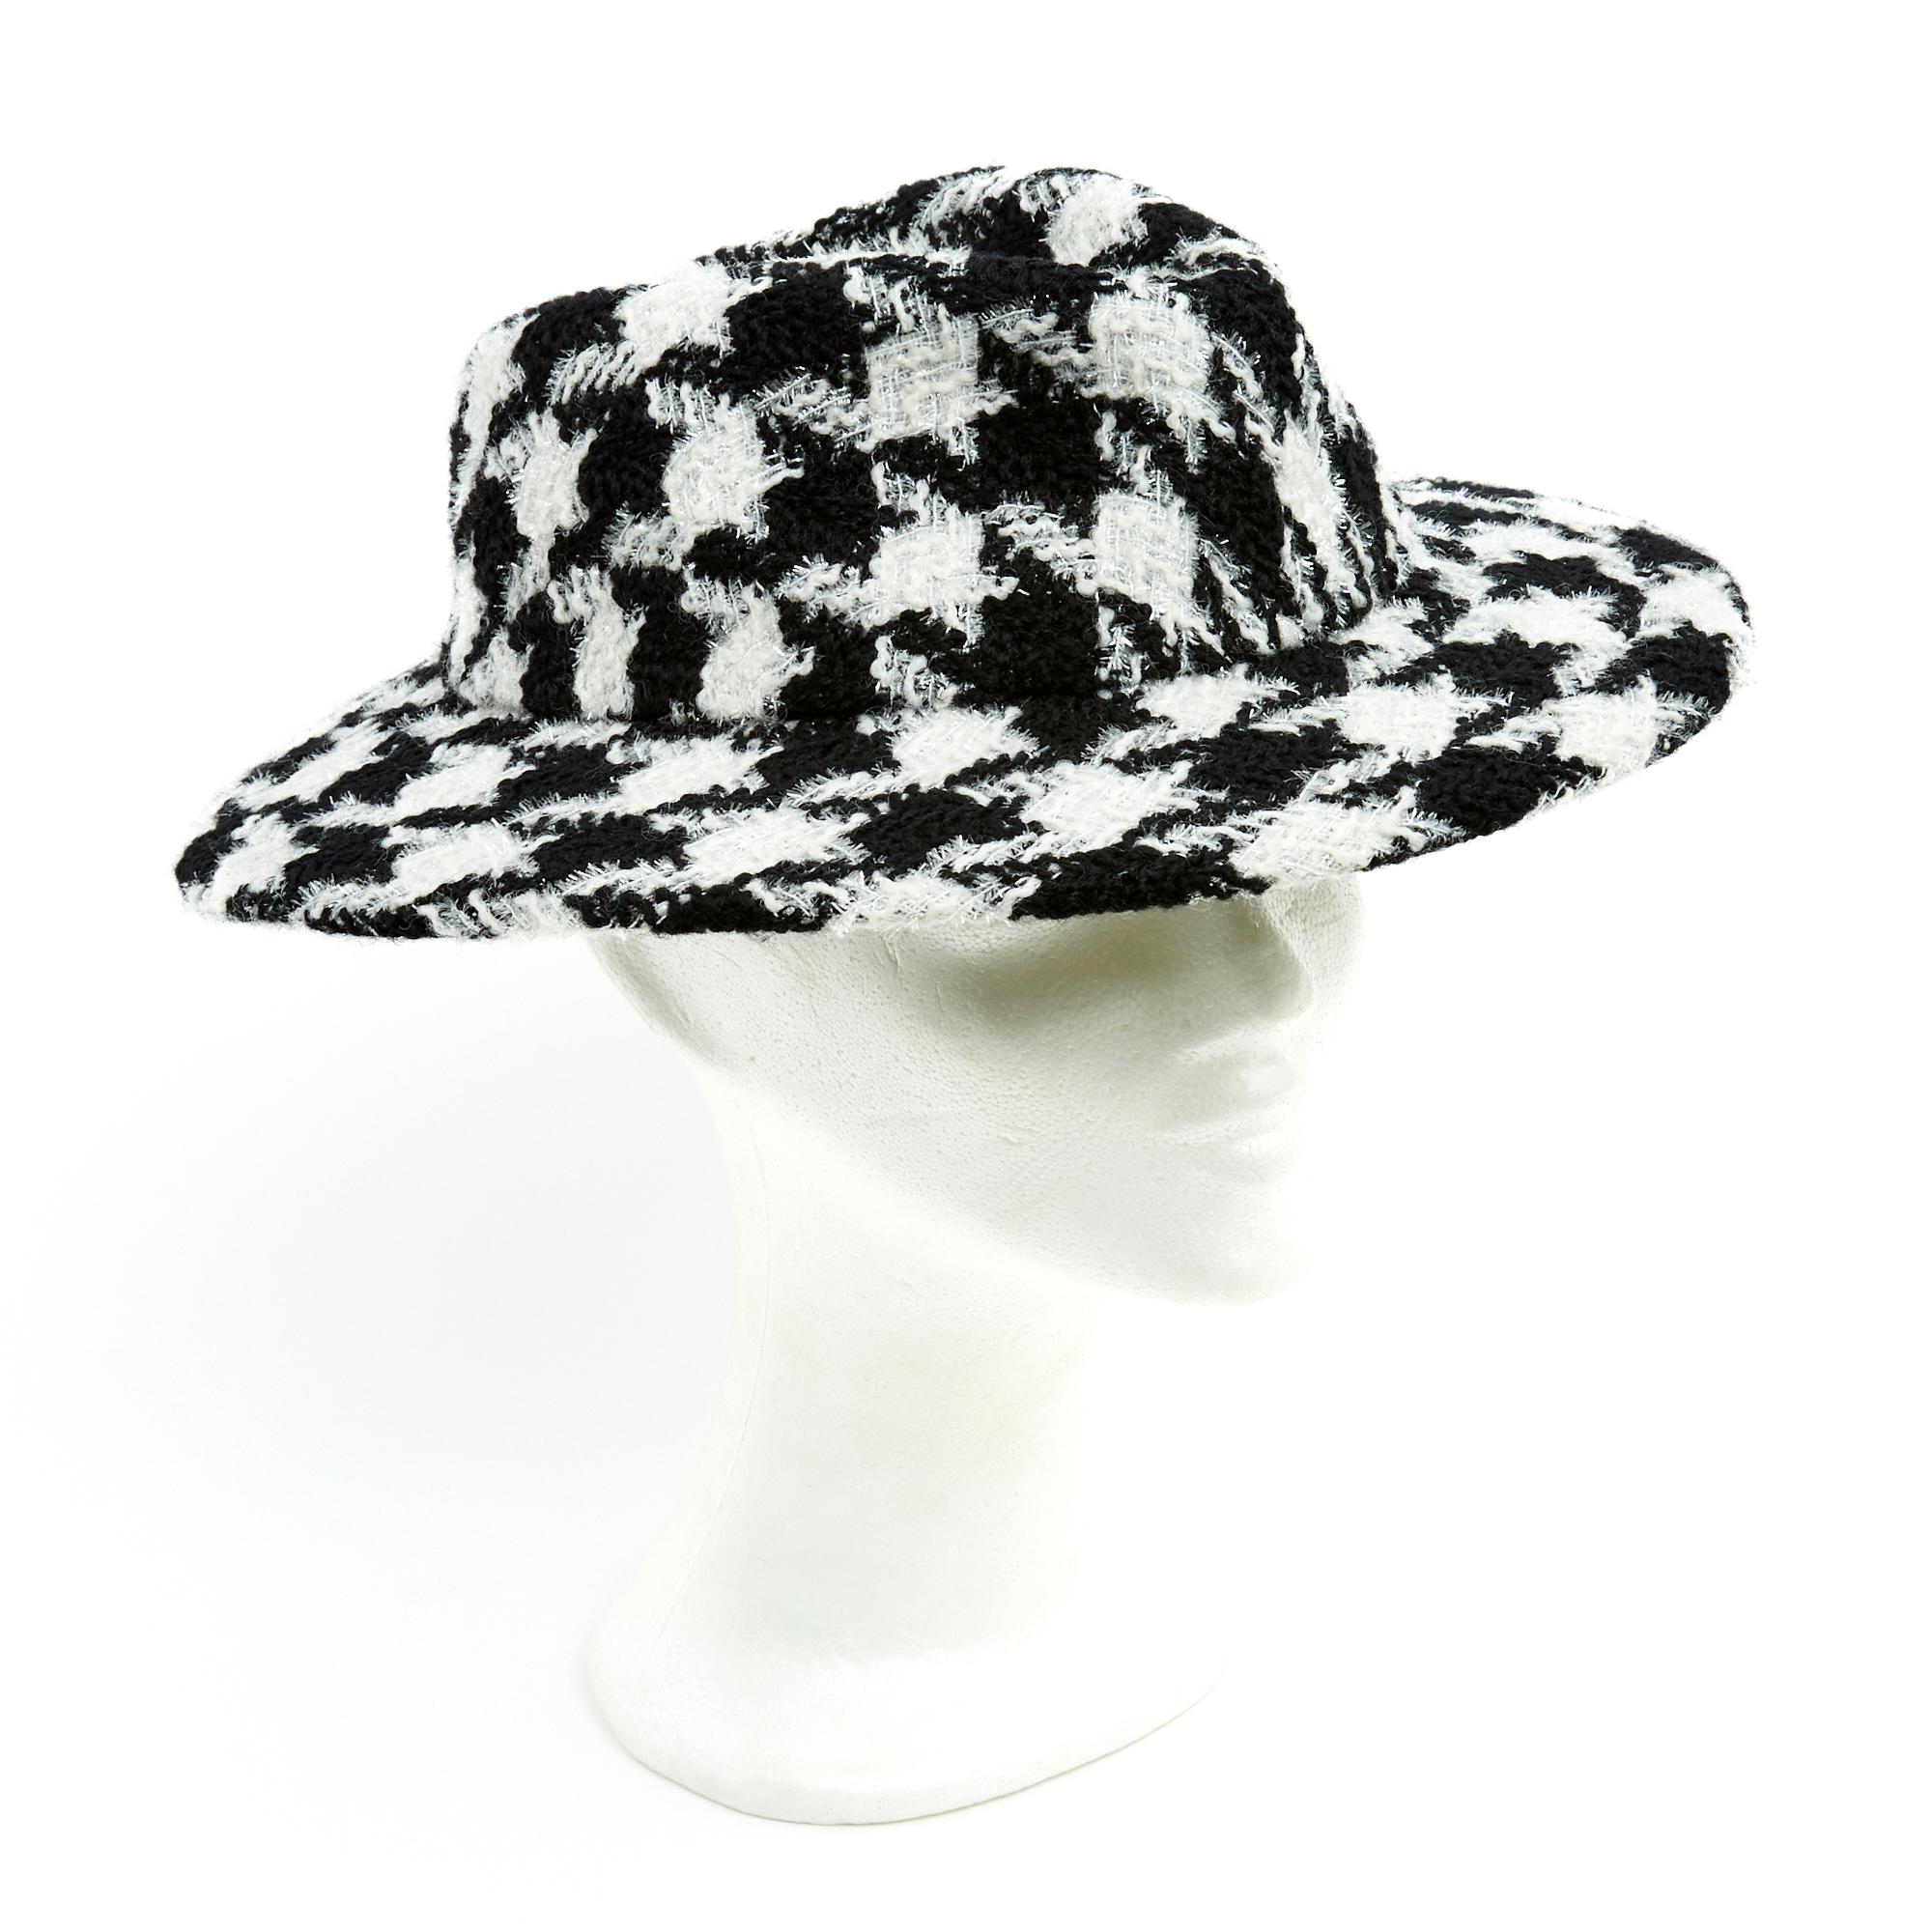 Chanel hat Fall Winter 2019 collection in cotton blend tweed houndstooth pattern, black and white tones. Size L. The hat is delivered without original invoice or Chanel packaging but it is perfectly new.